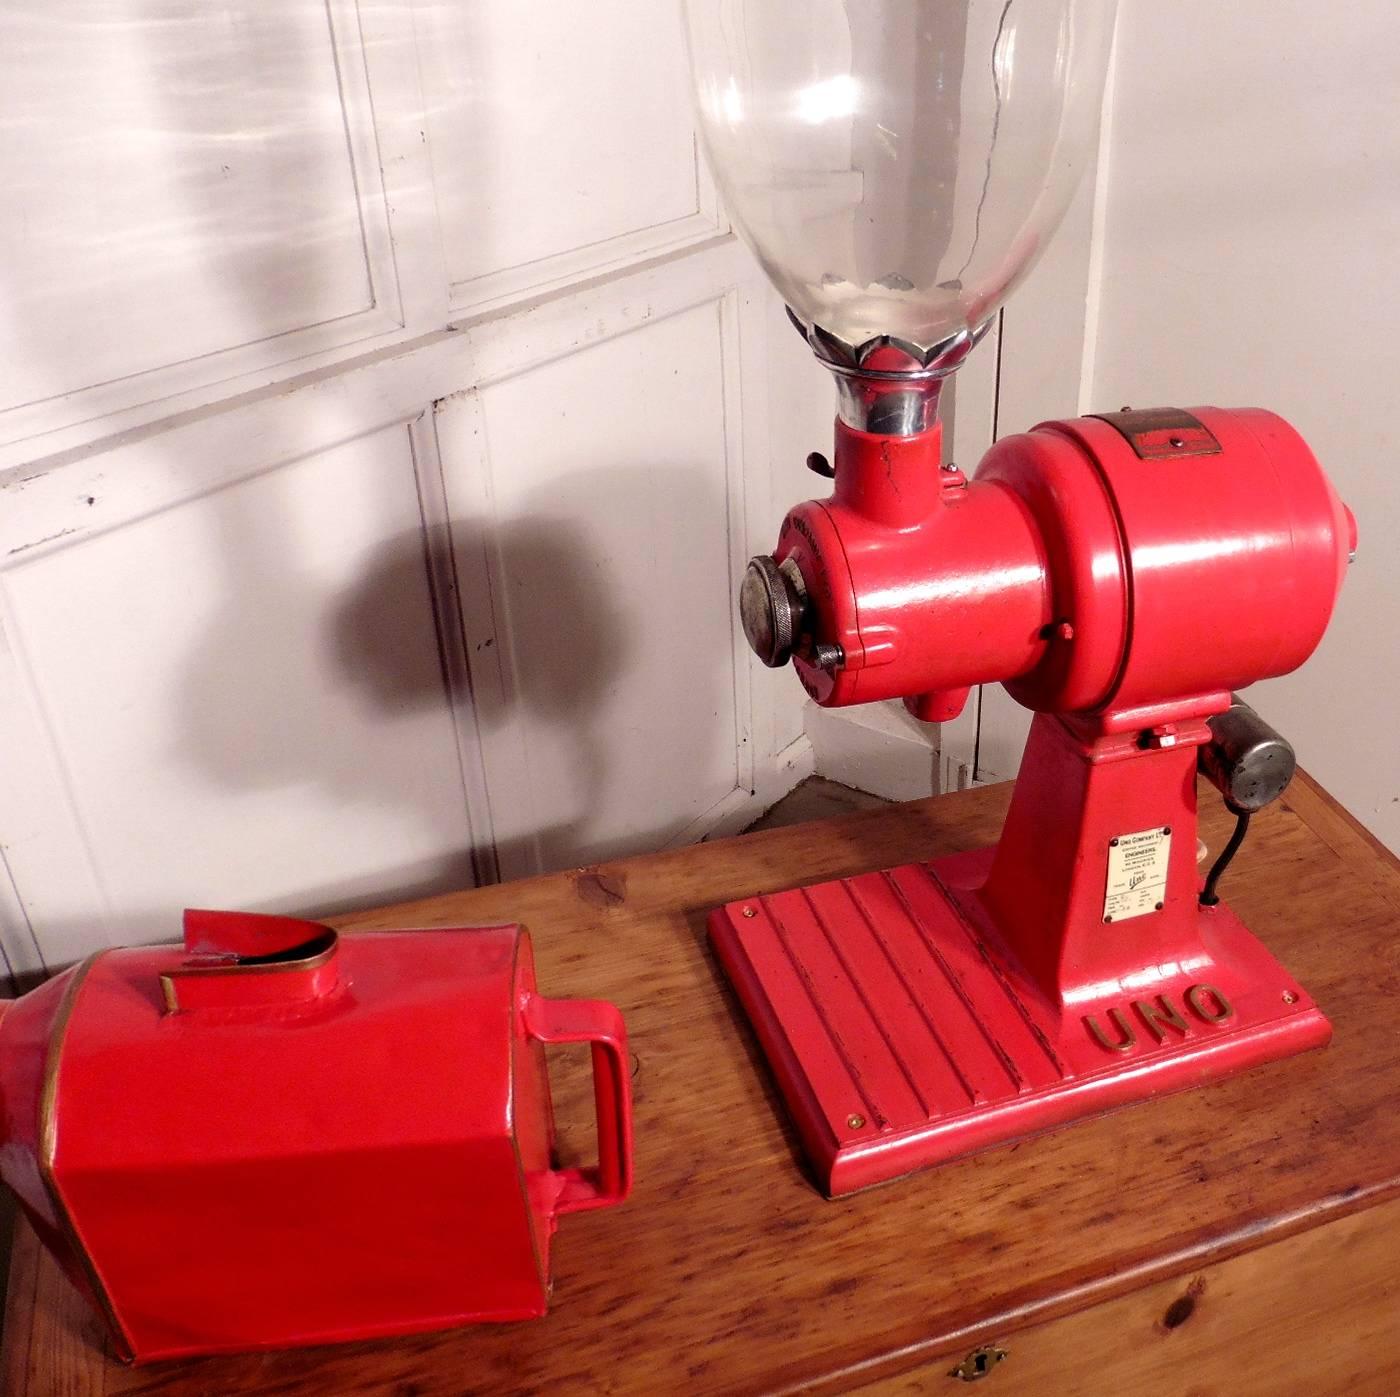 A rare piece indeed and design icon of its time made in London

This big red machine with its glass hopper would have been seen in all grocer’s shops in a bygone era.
The smell of coffee freshly ground to order, we all know that so well, the